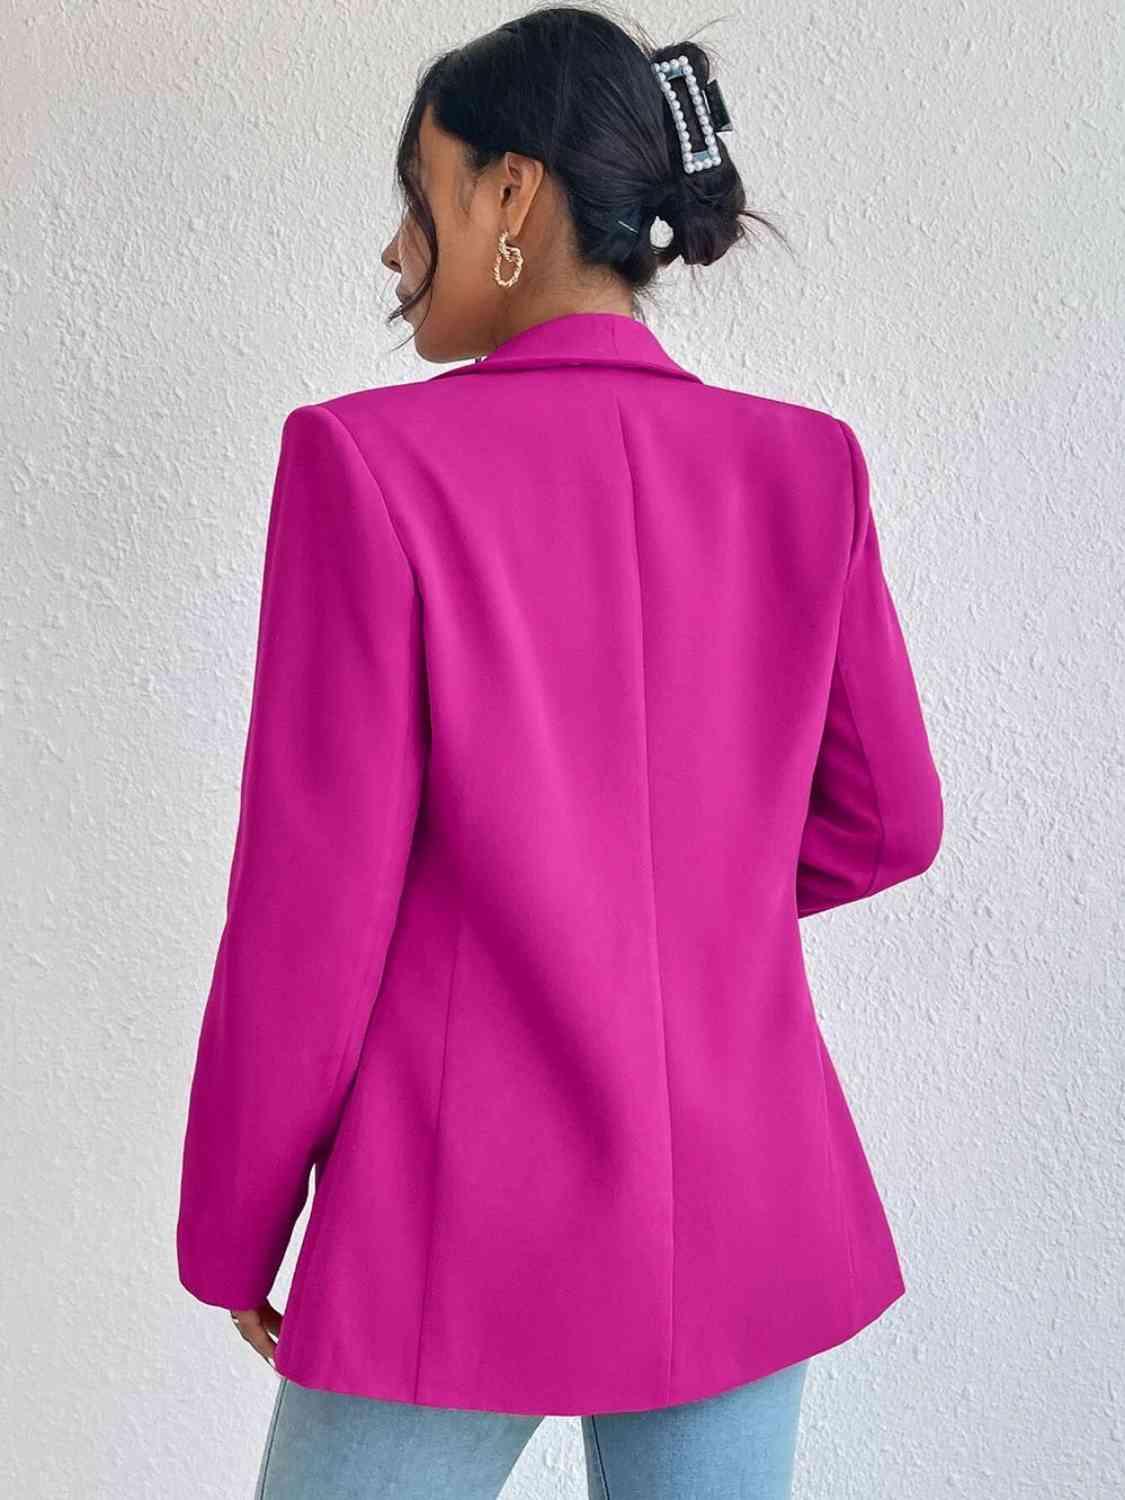 a woman wearing a bright pink blazer and jeans